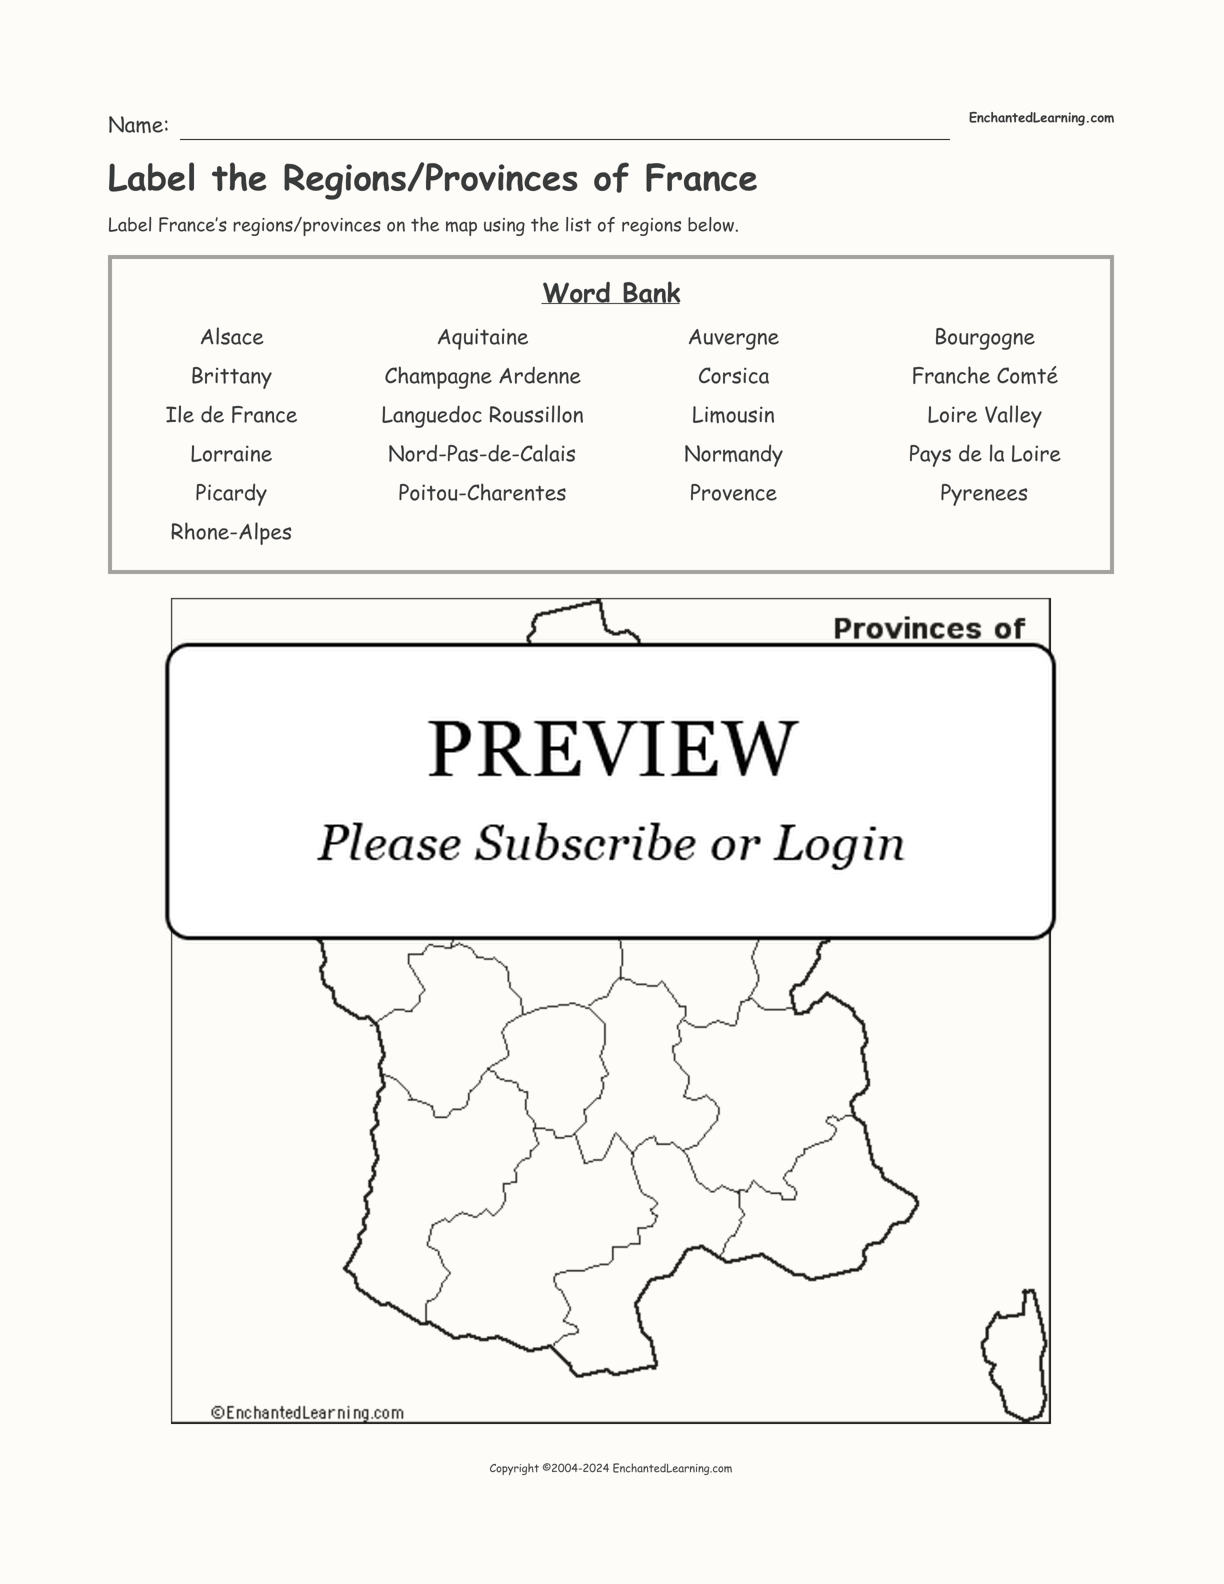 Label the Regions/Provinces of France interactive worksheet page 1